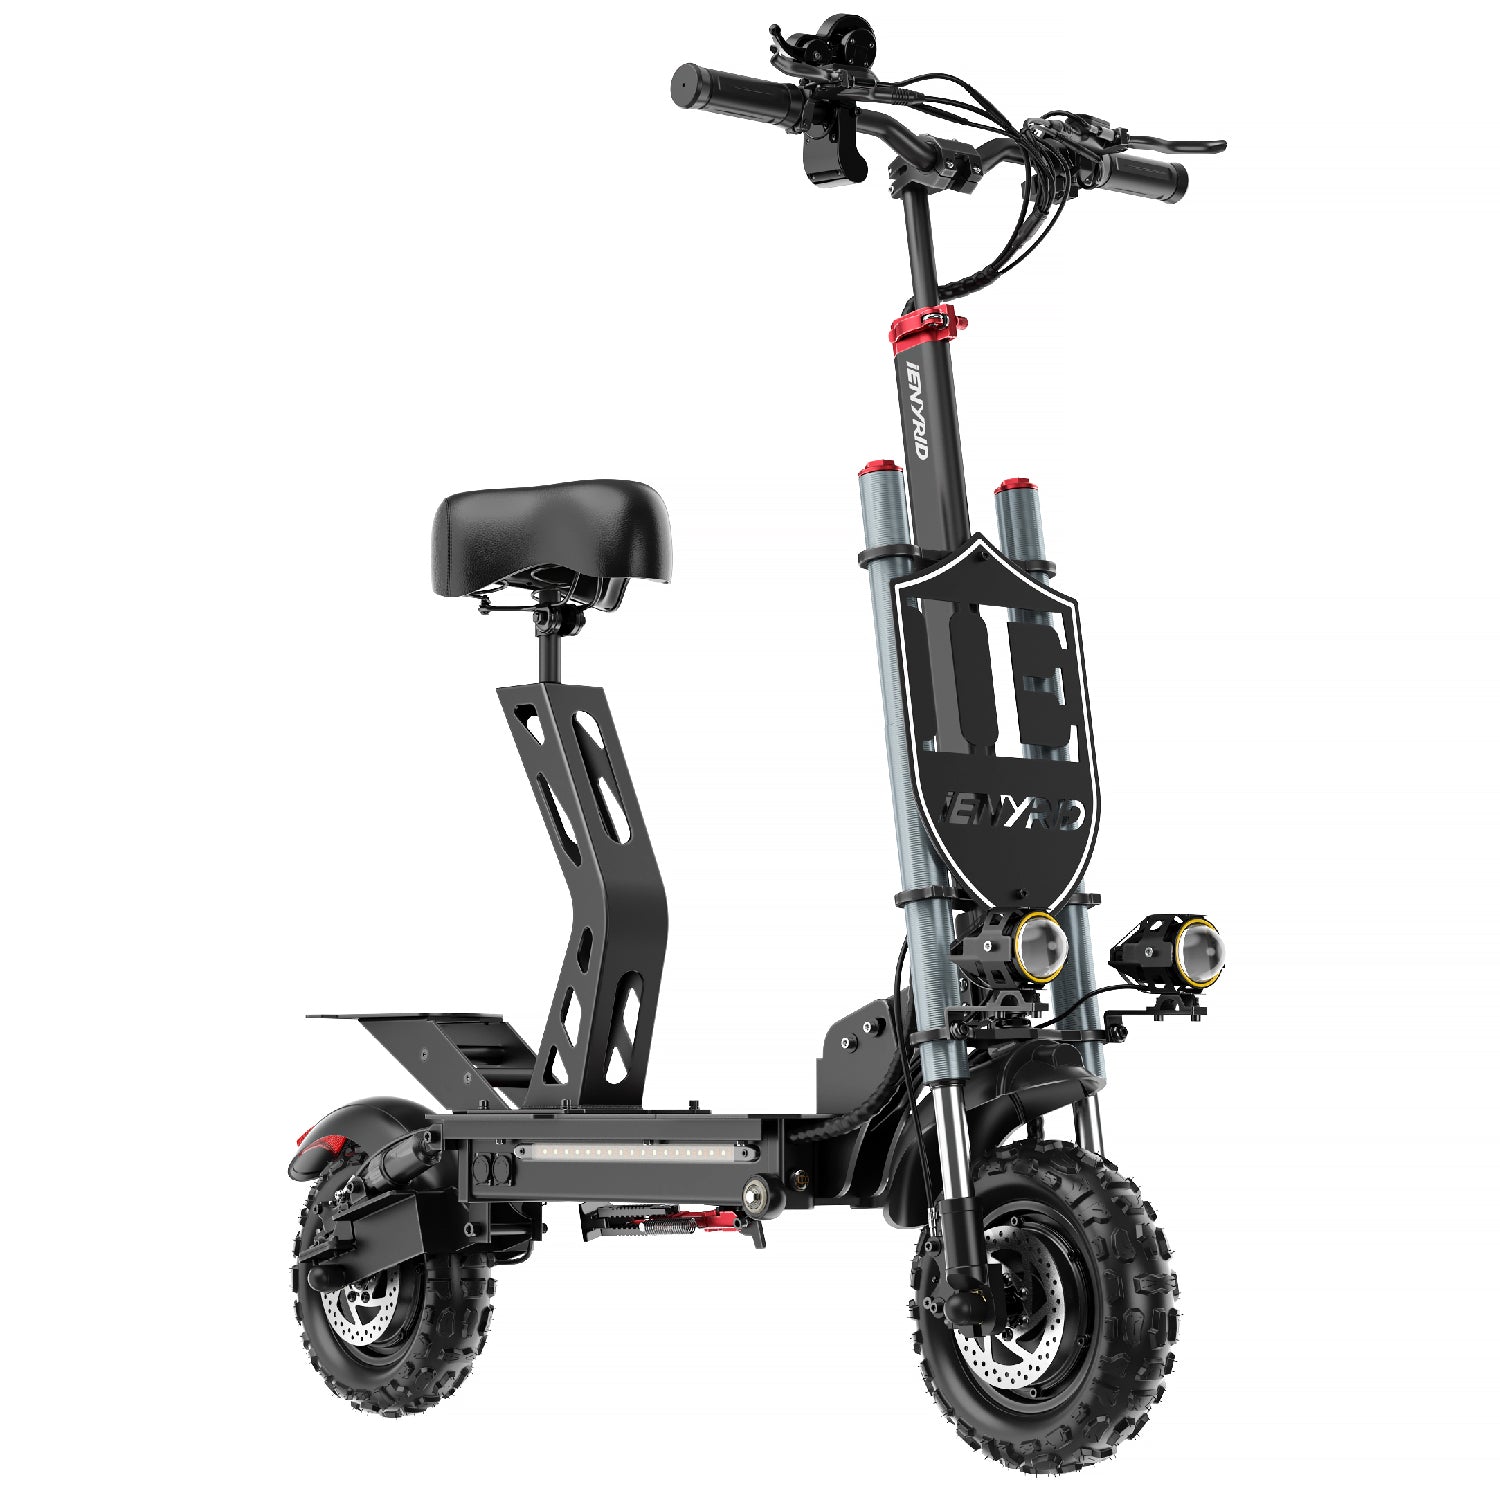 IENYRID ES20 1200W x 2 Dual Motor 11 Inch Off-road Electric Scooter 20Ah Battery